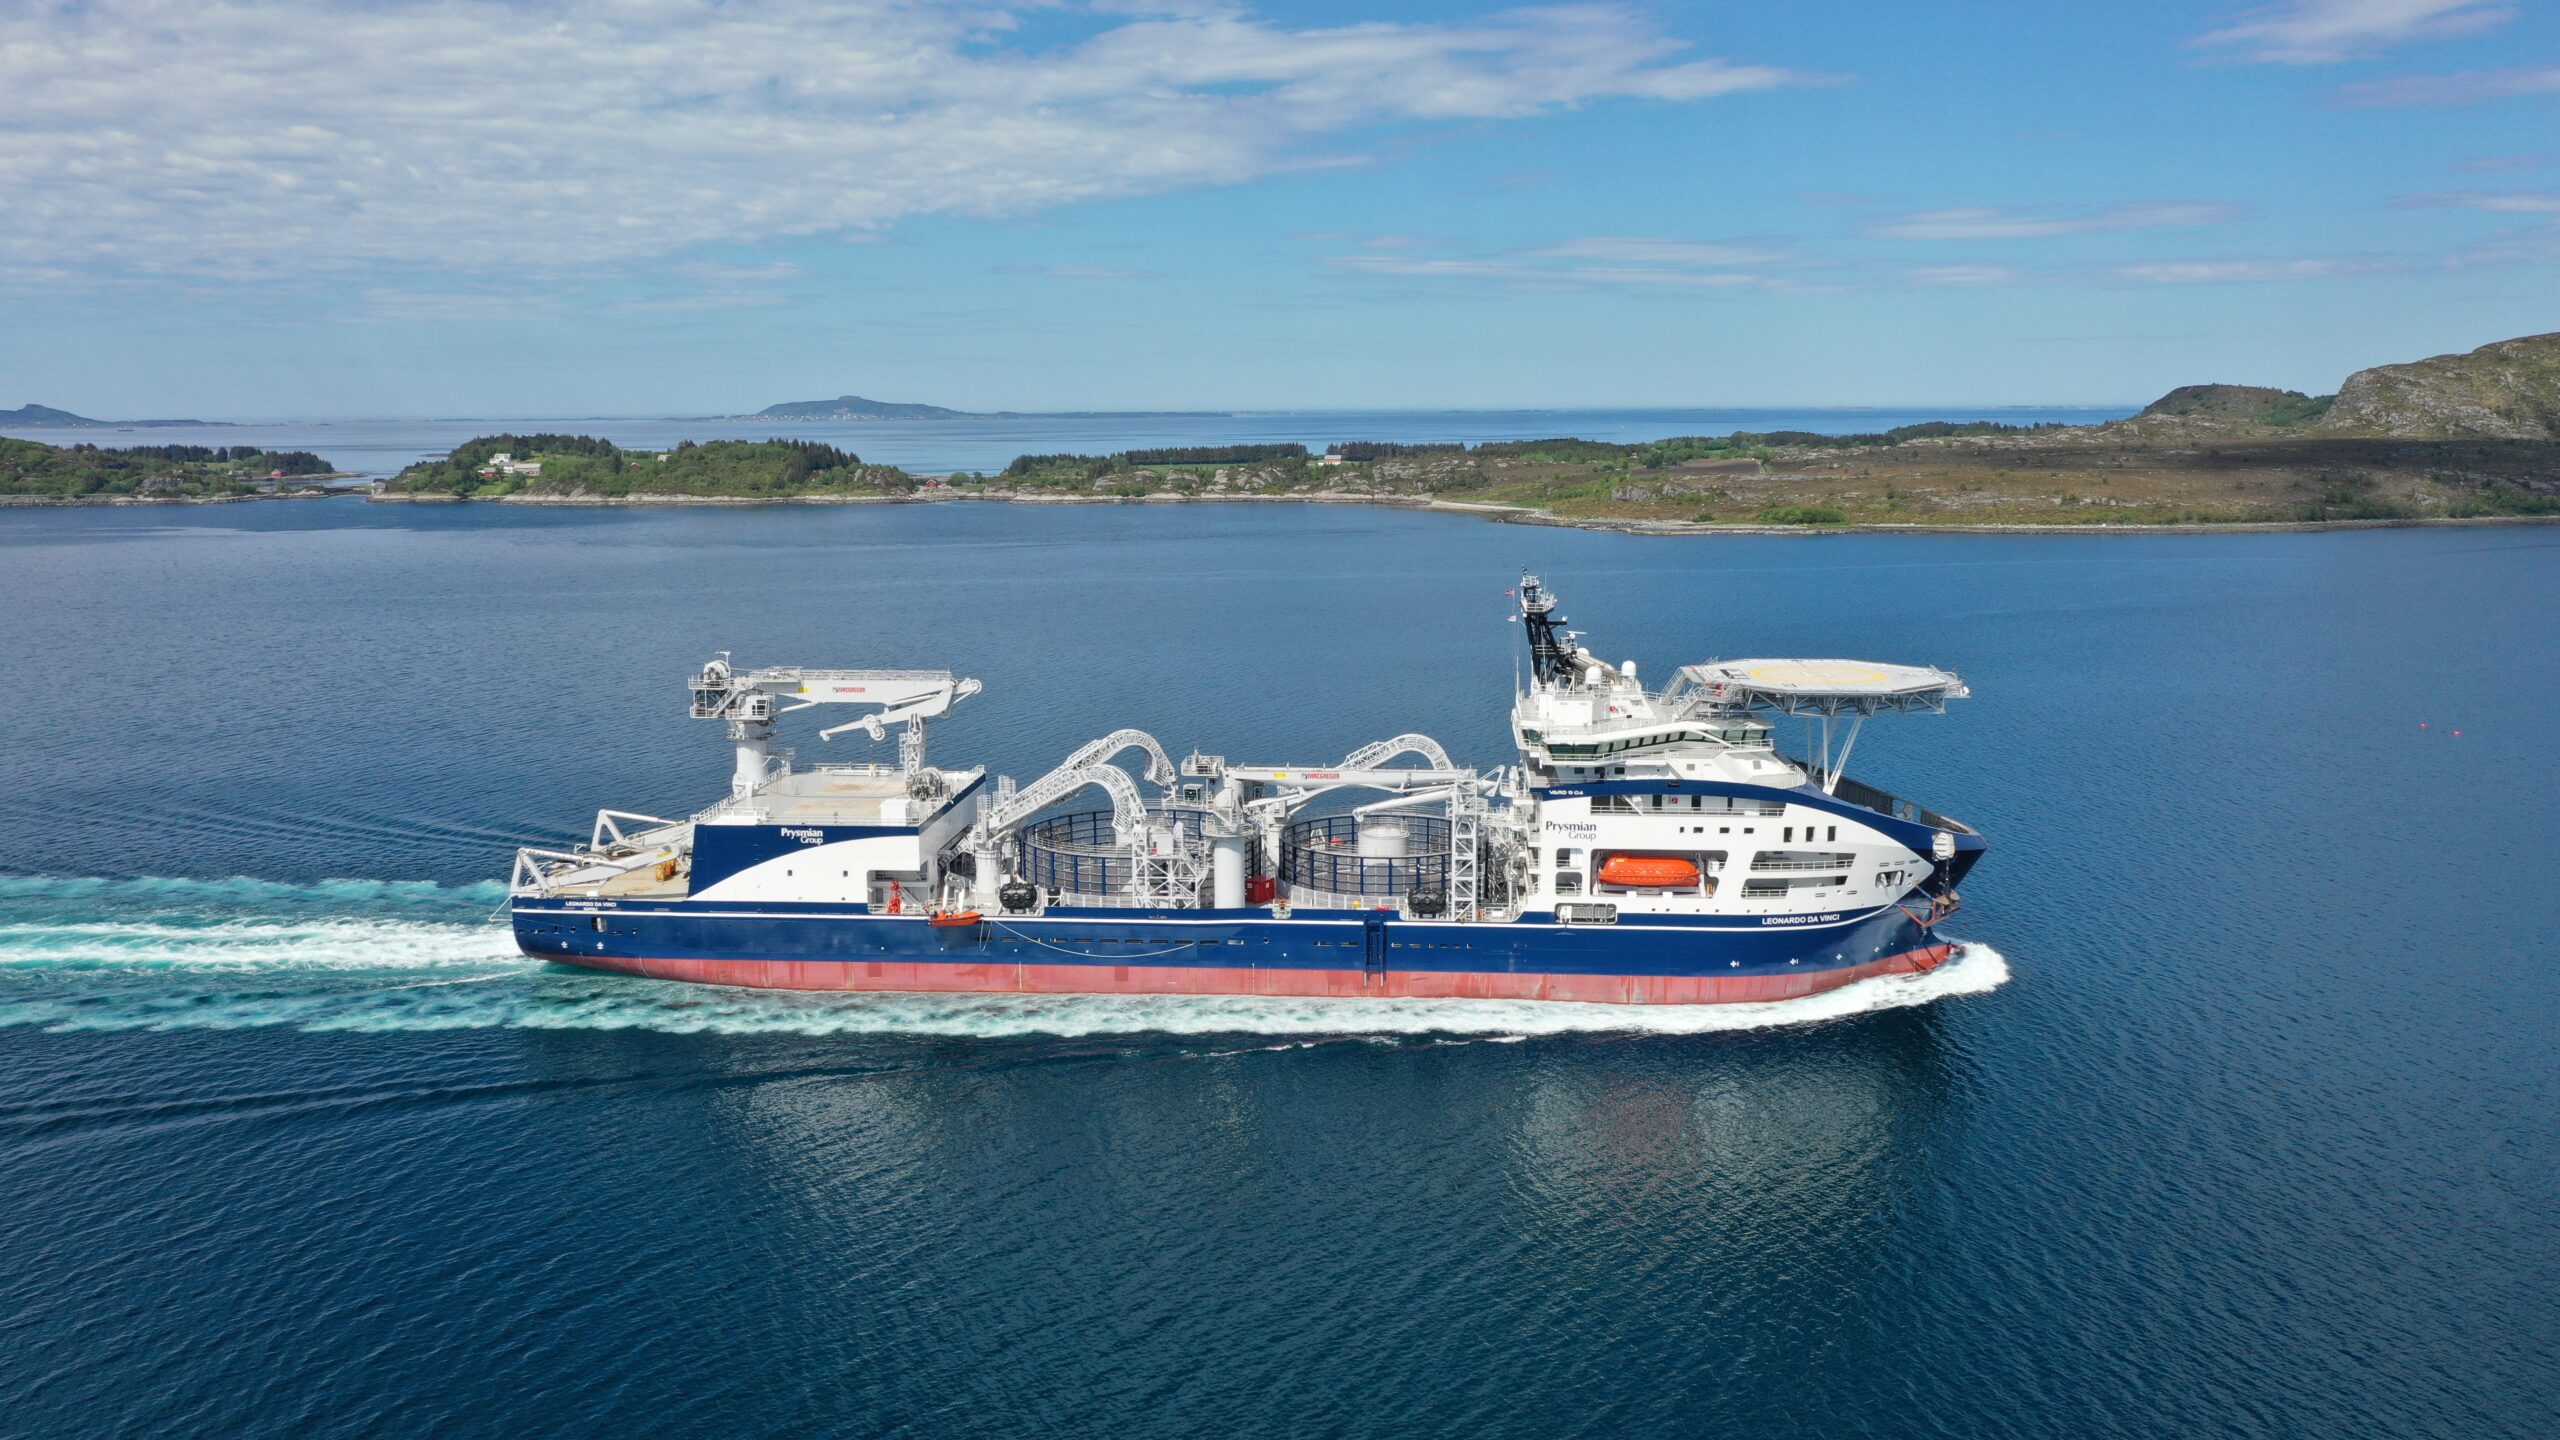 MEMBER NEWS: Miros extends services to Prysmian advanced cable lay vessel